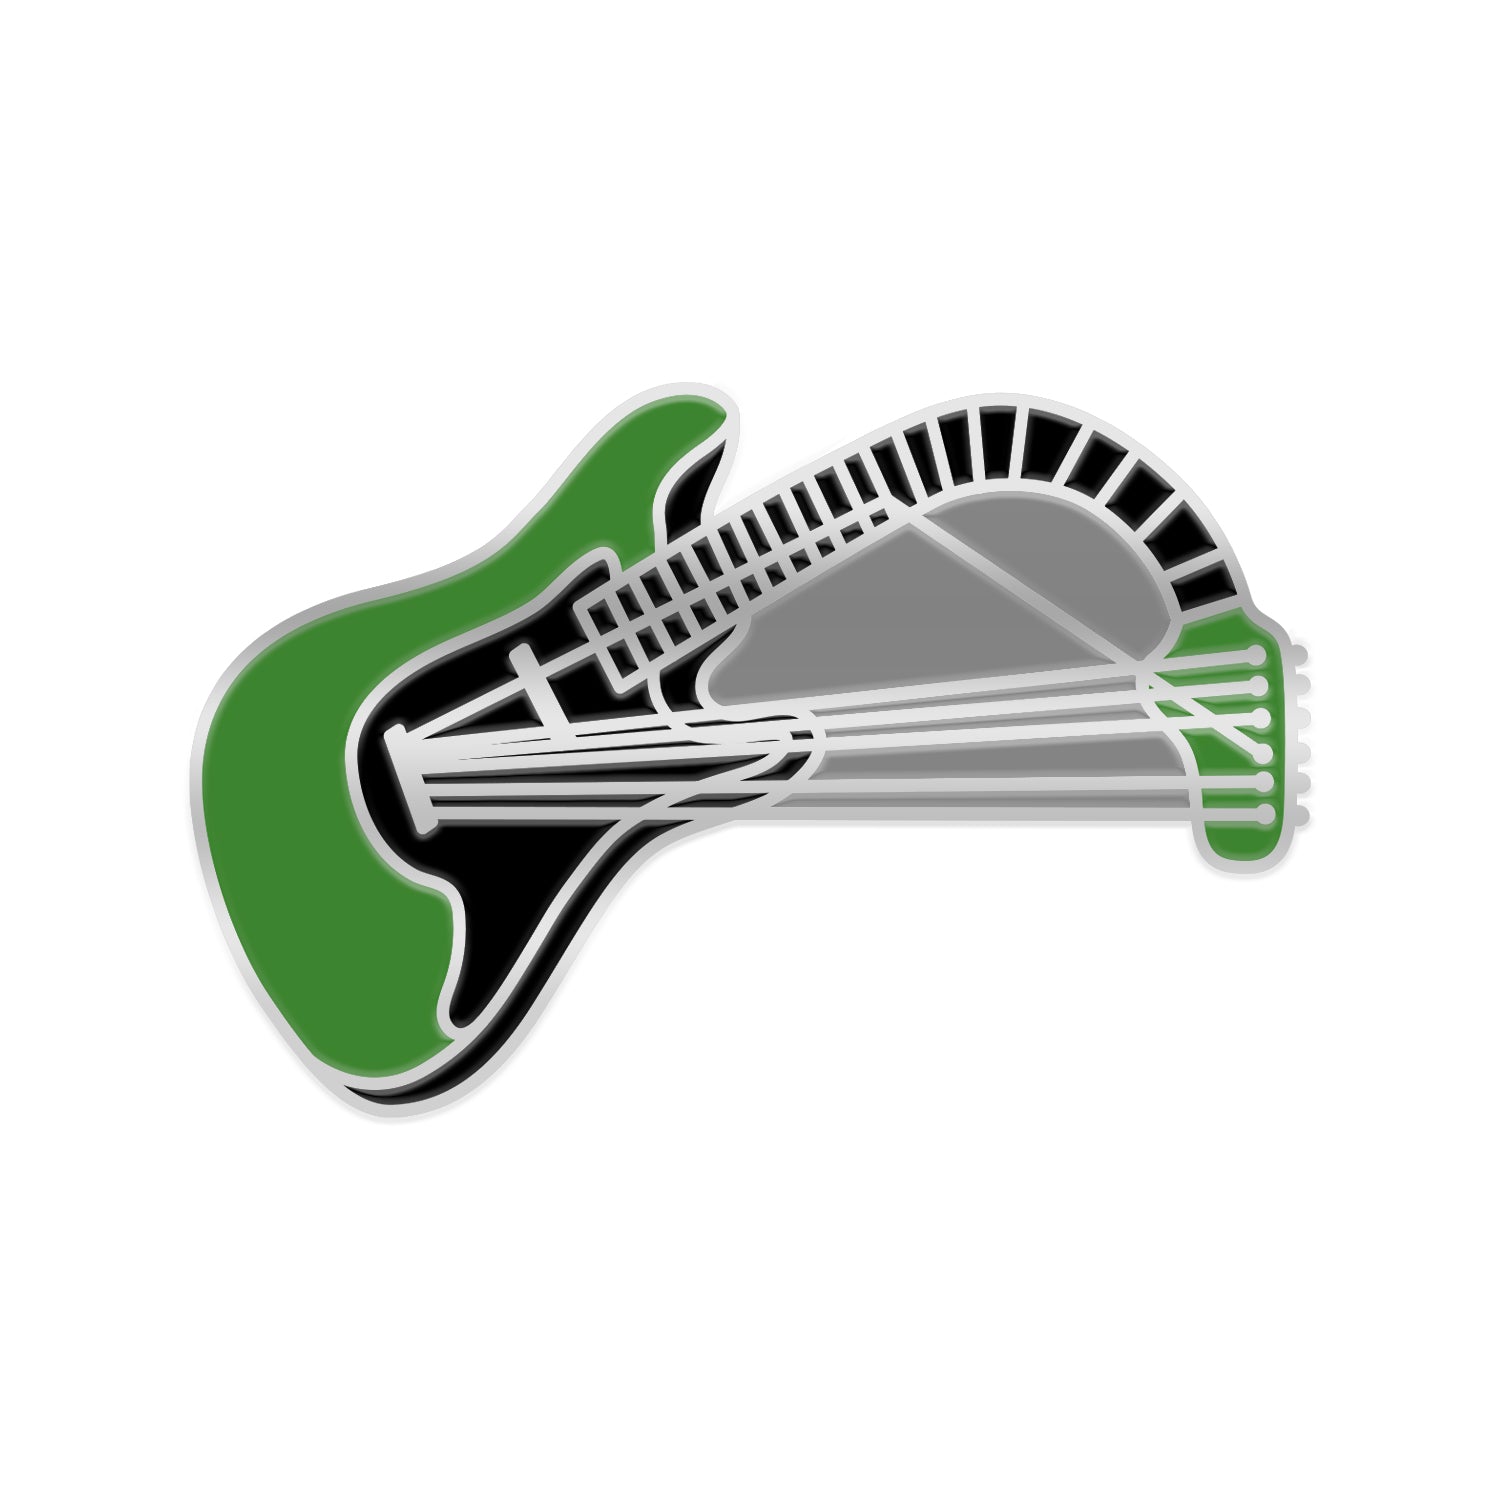 Pin on Guitar & other instruments